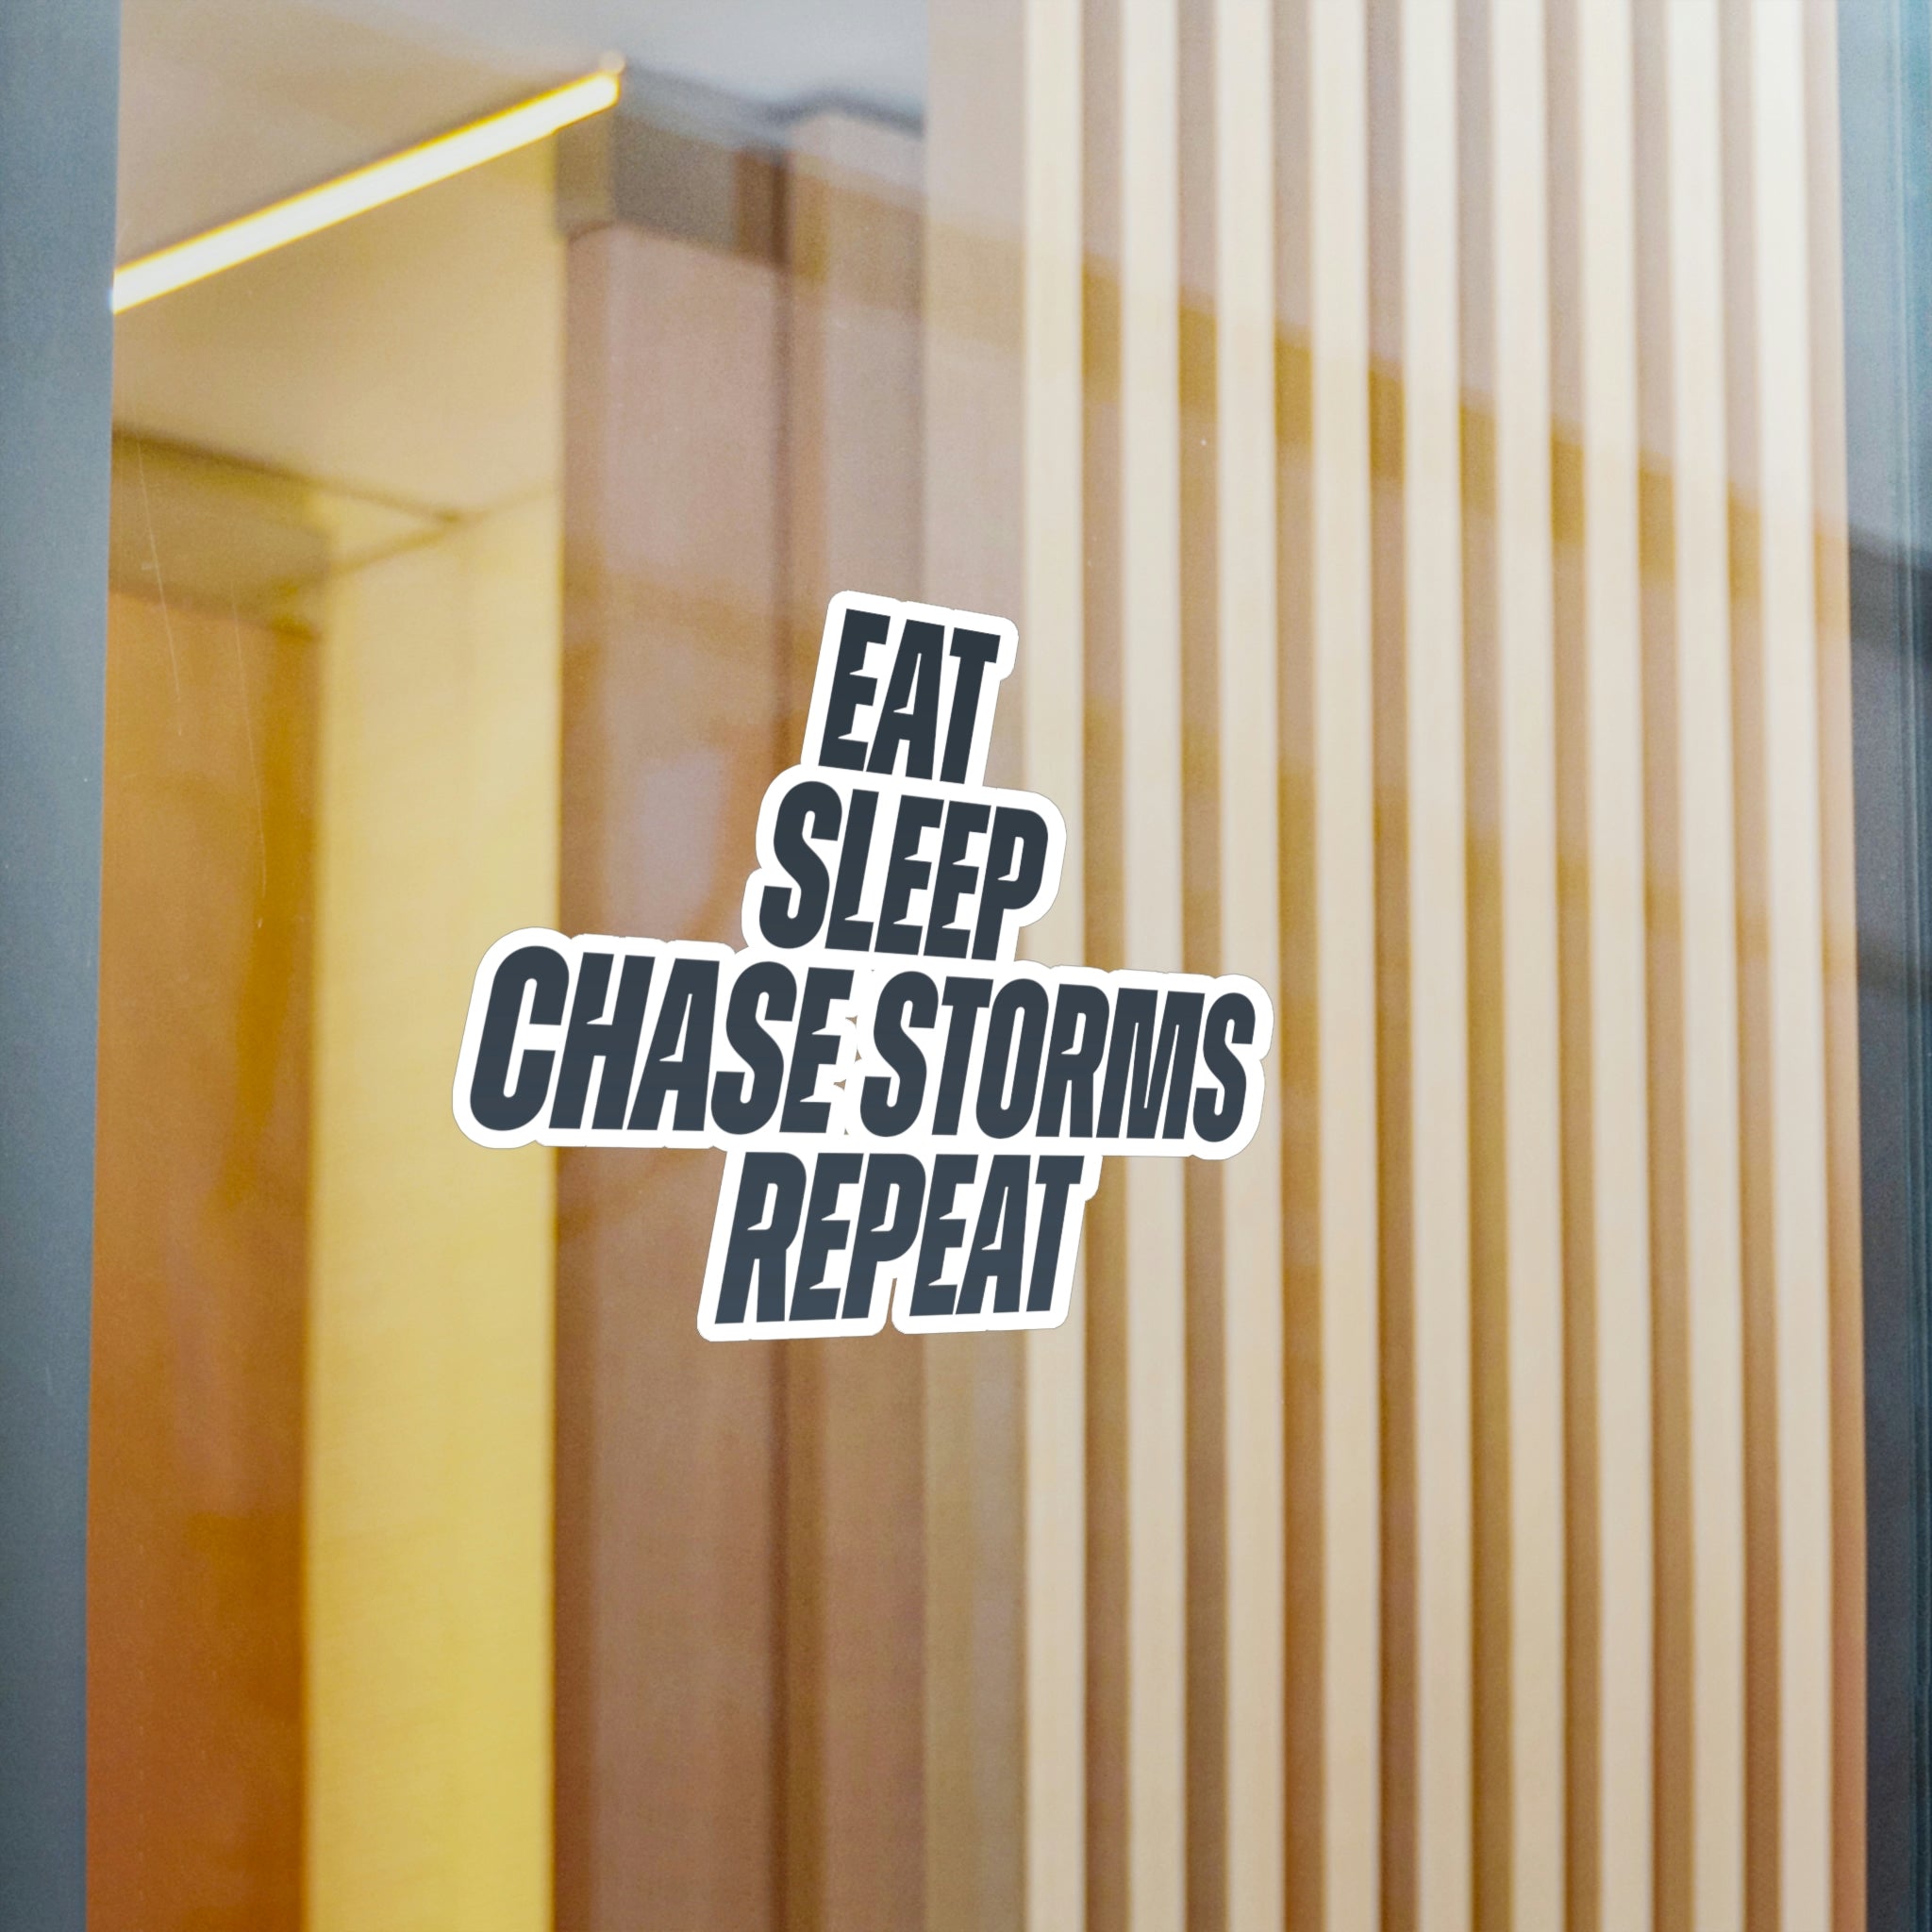 Eat, Sleep, Chase Storms, Repeat Vinyl Decal 